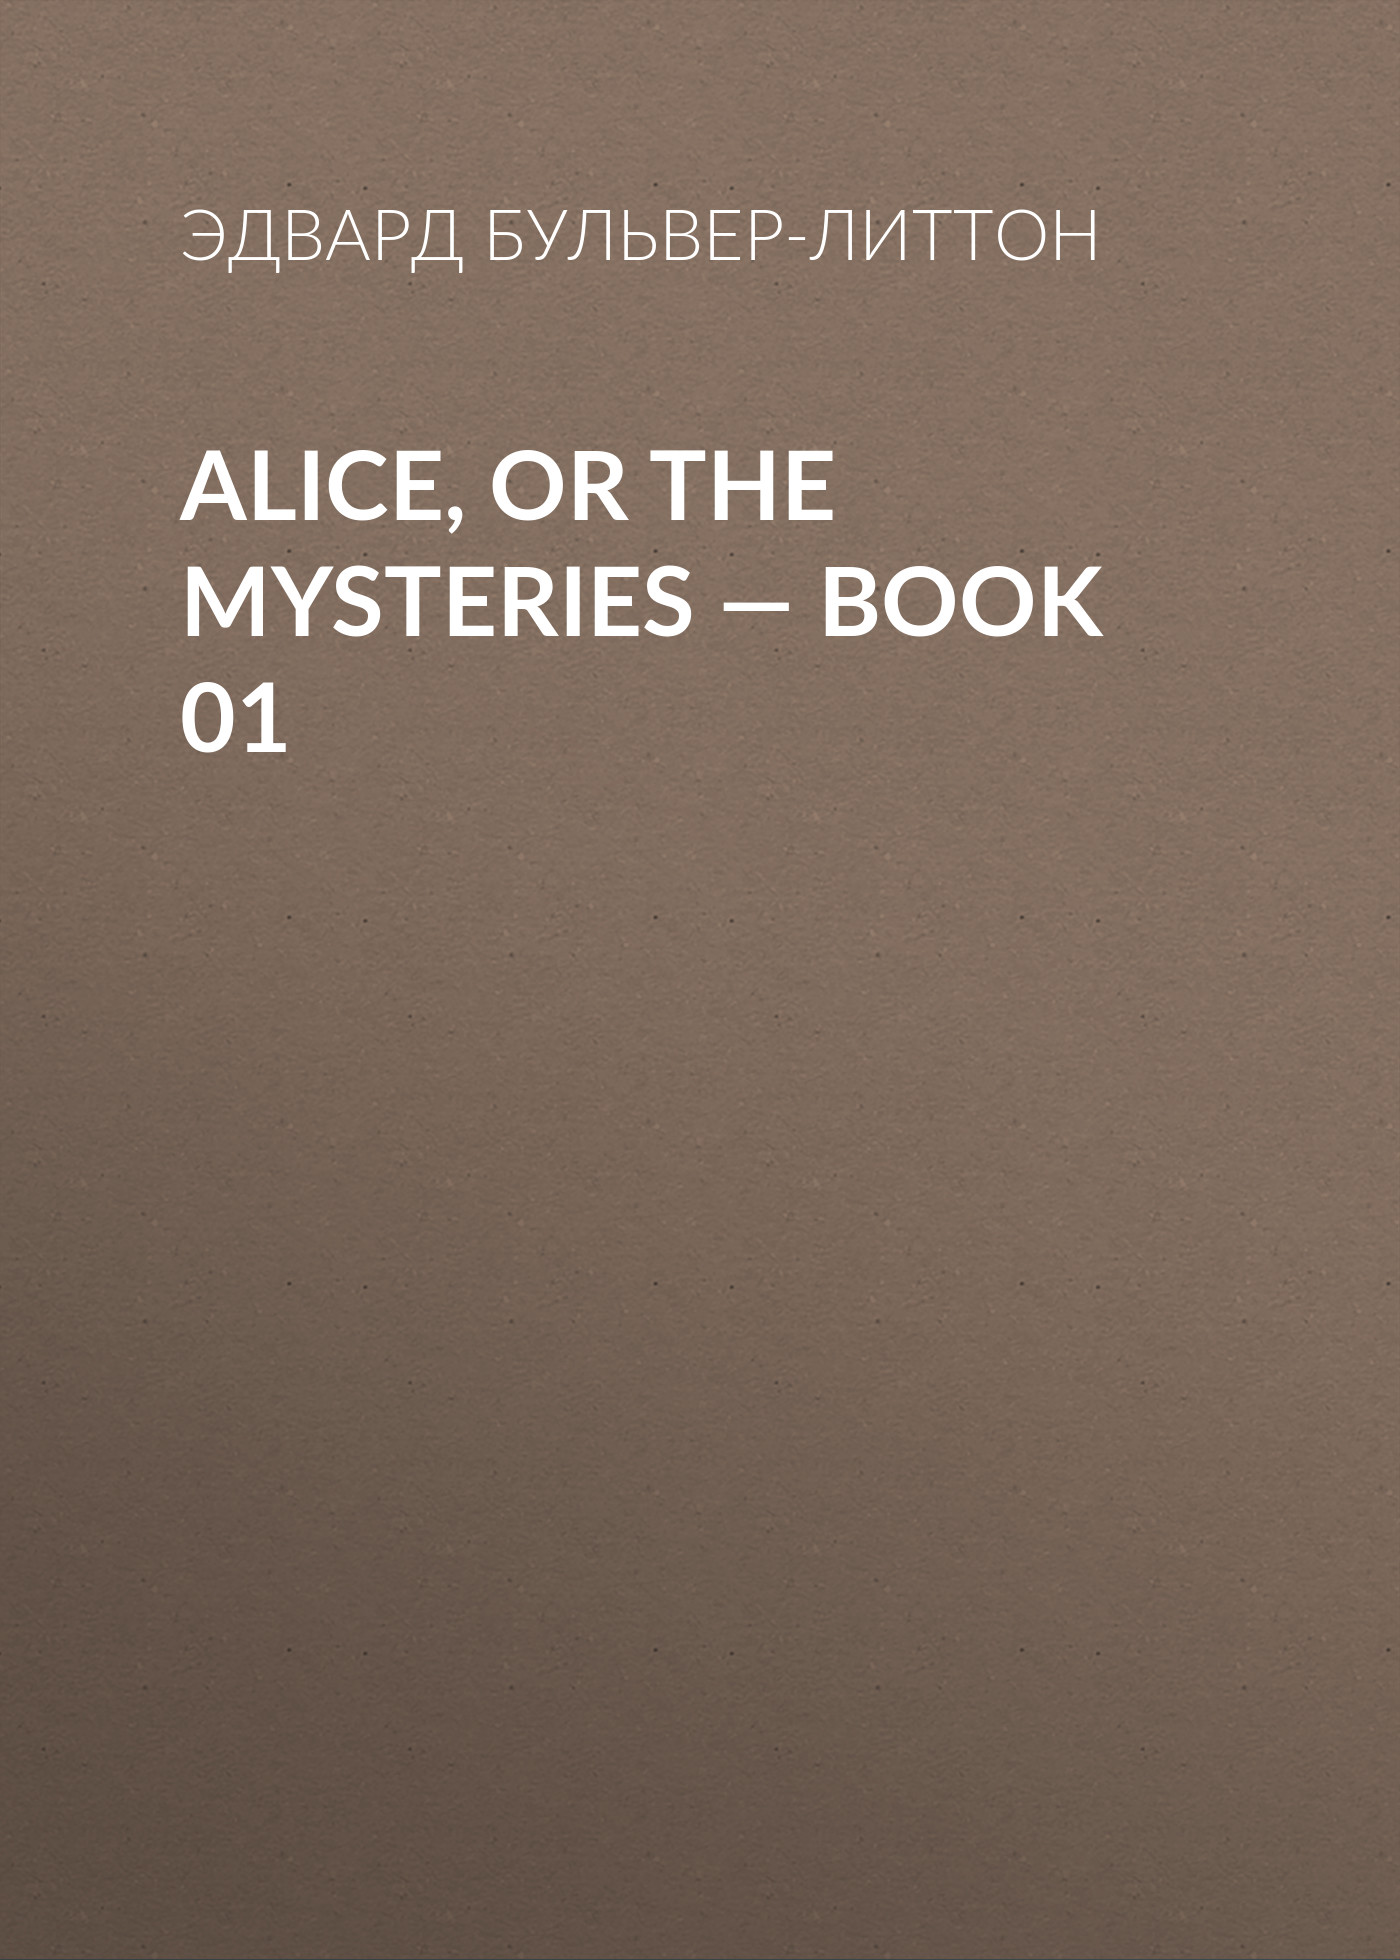 Alice, or the Mysteries— Book 01